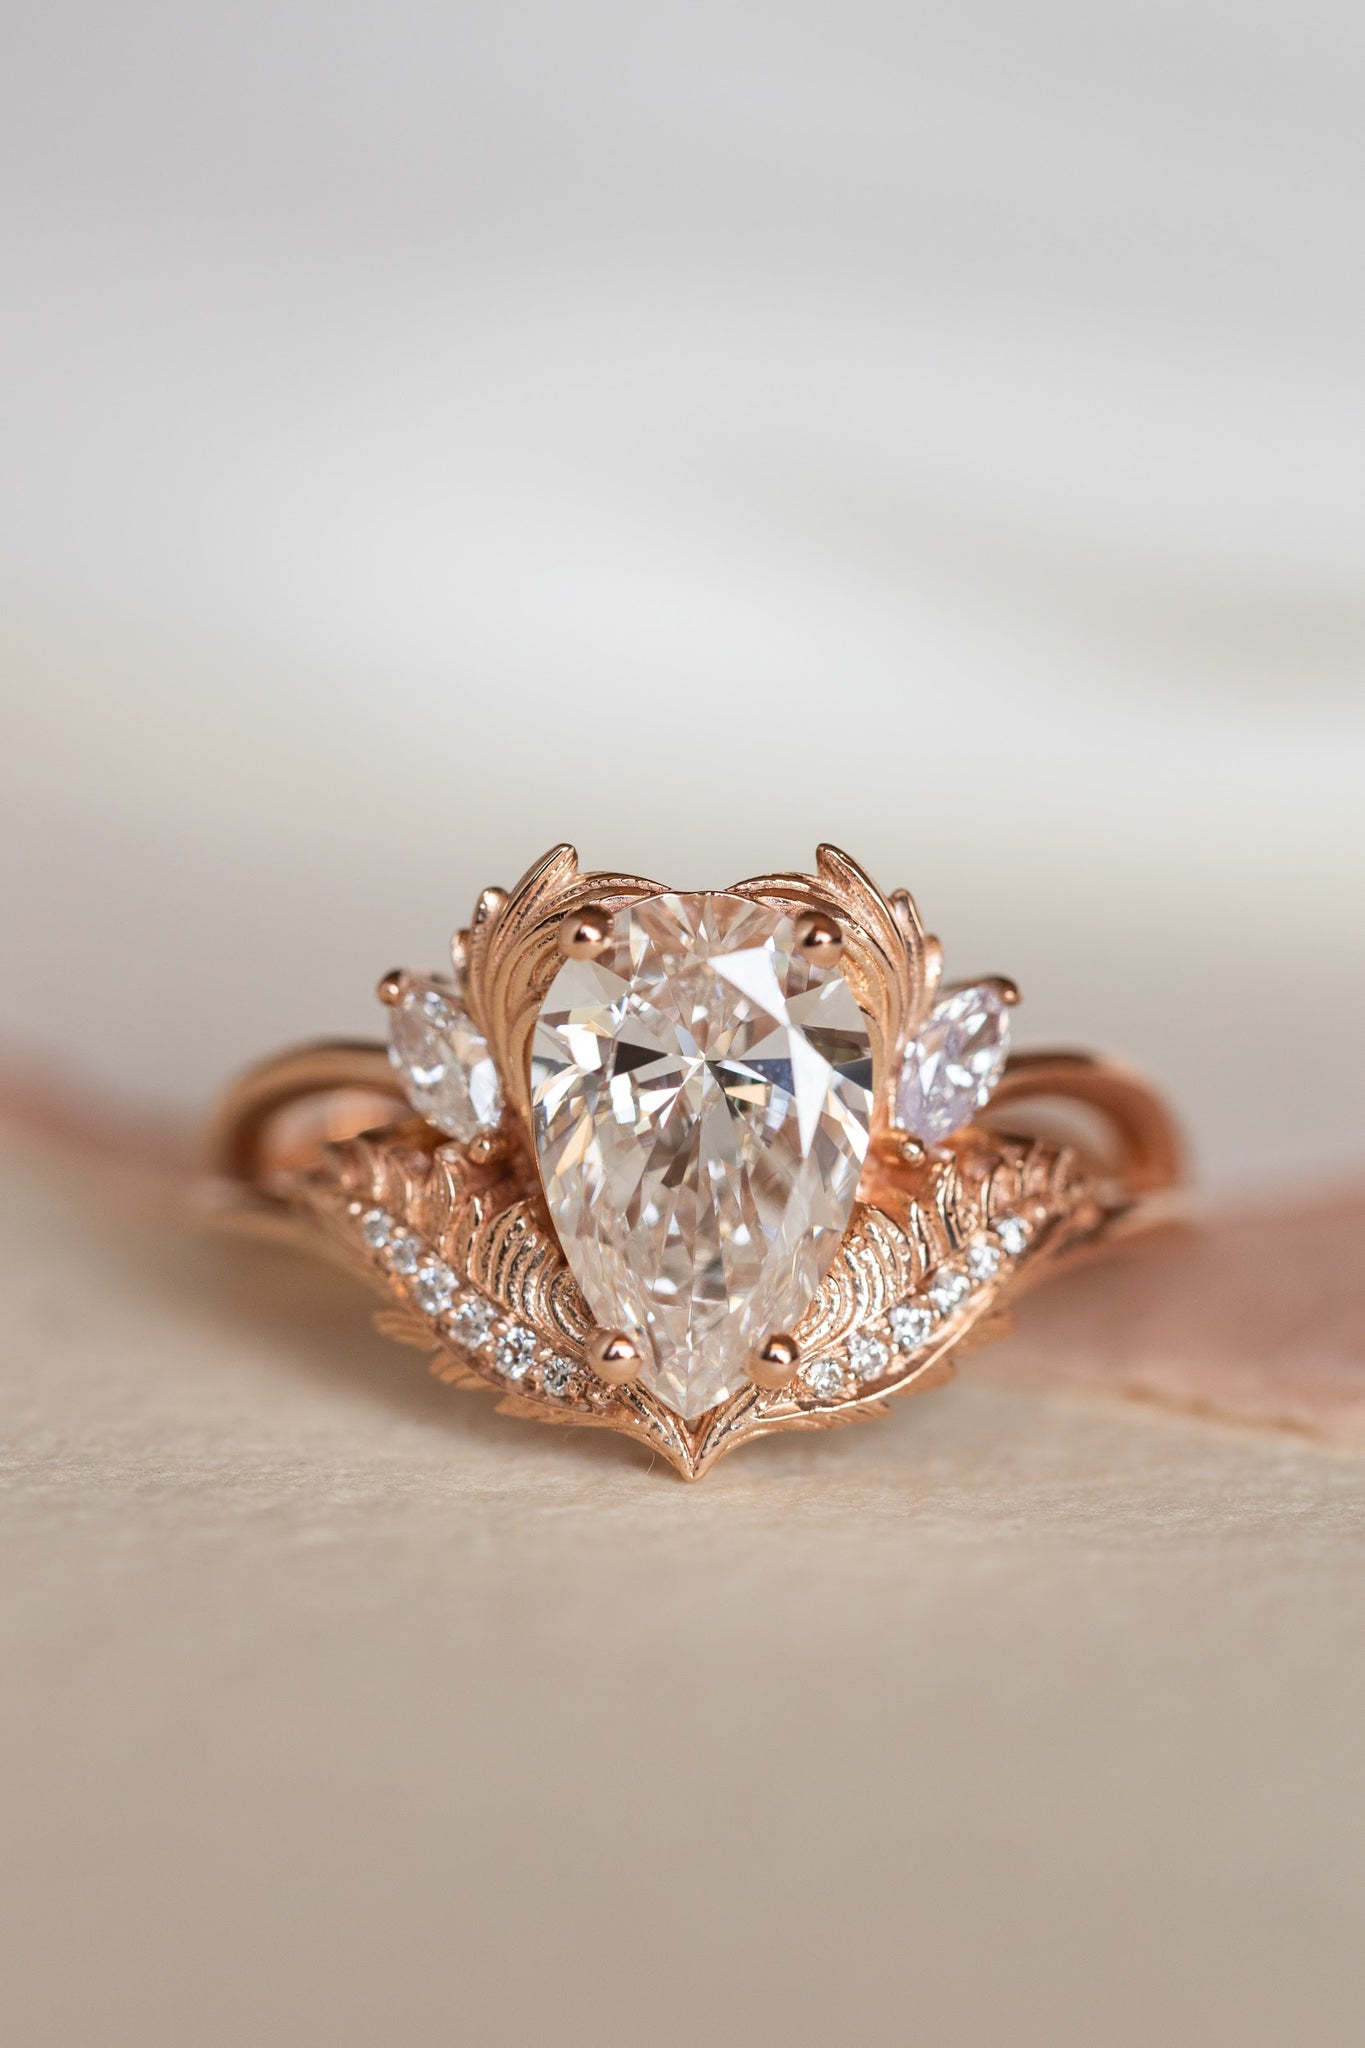 Lab grown diamond engagement ring, rose gold ring with pear cut gemstone / Adonis - Eden Garden Jewelry™